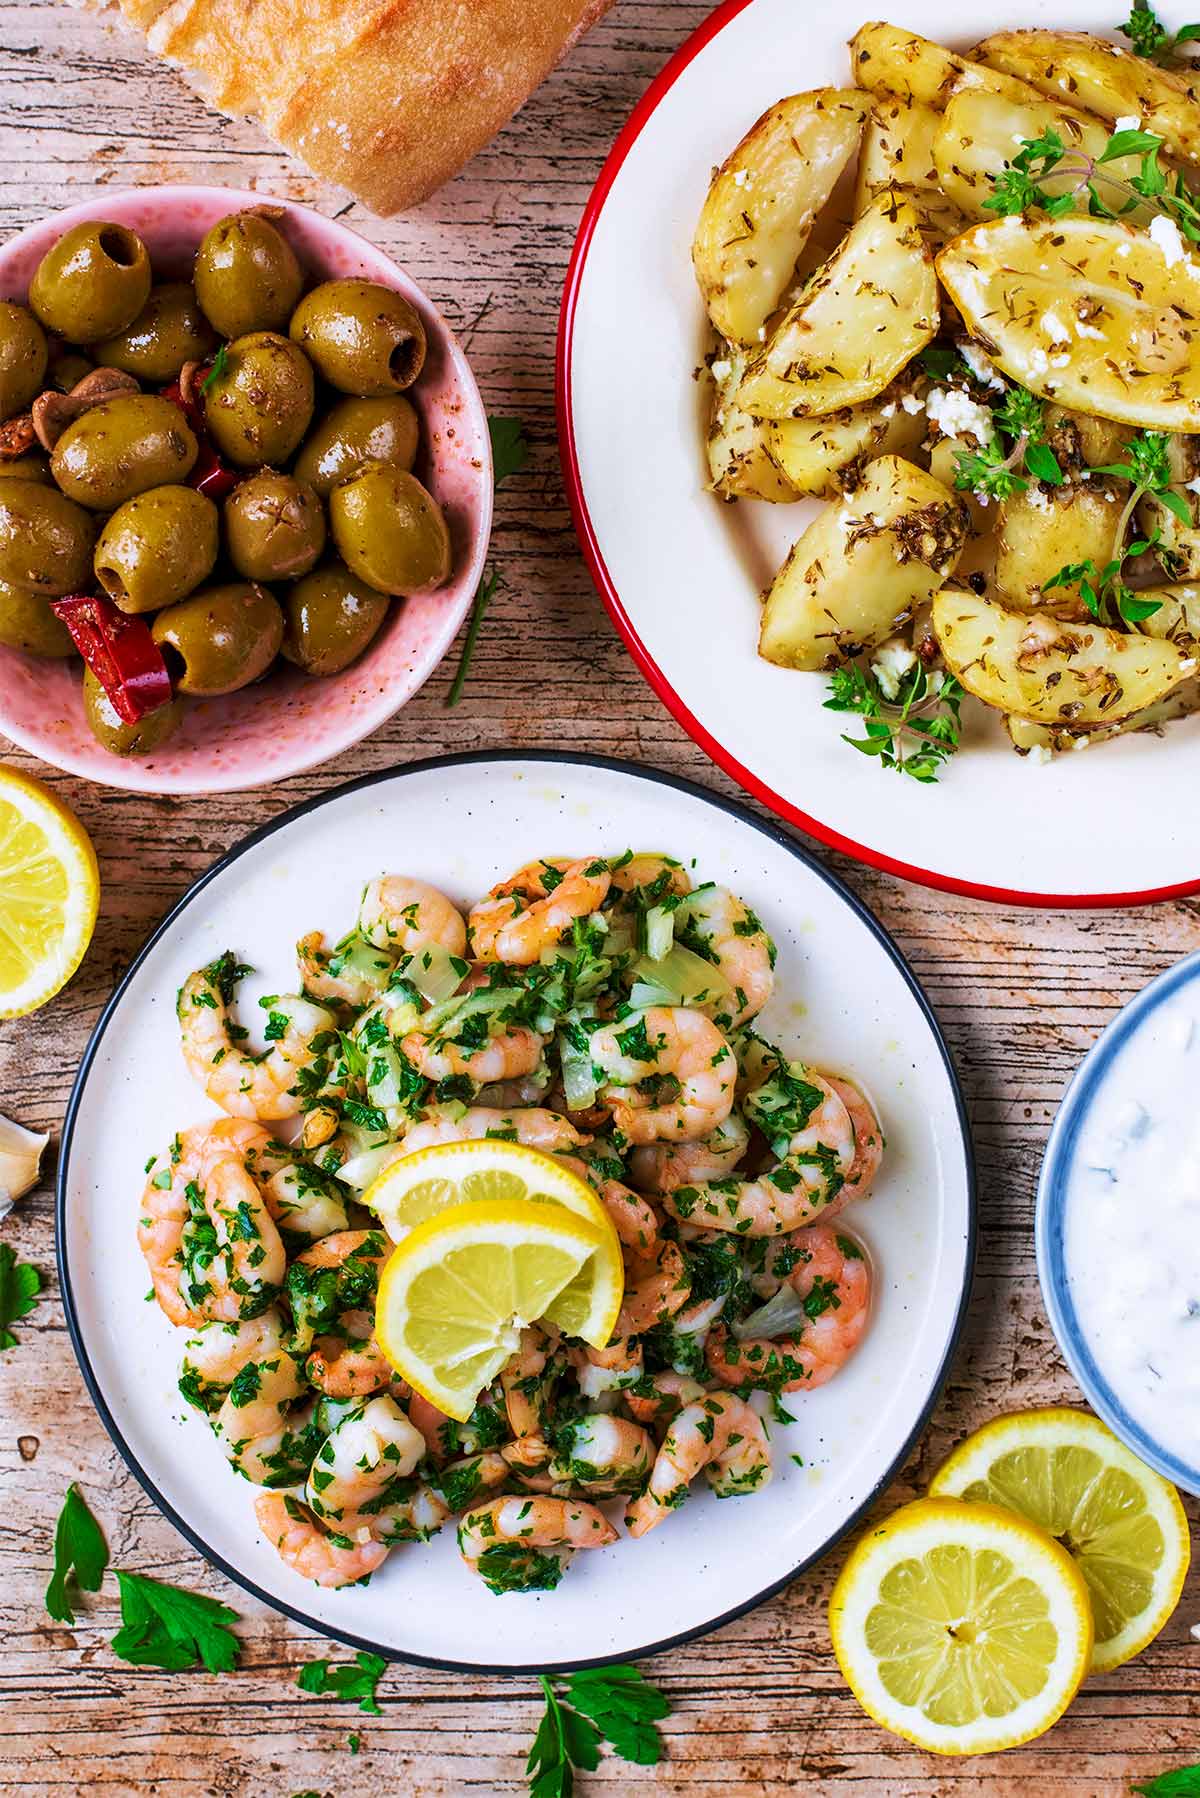 Cooked prawns on a plate next to plates of potatoes, olives and bread.